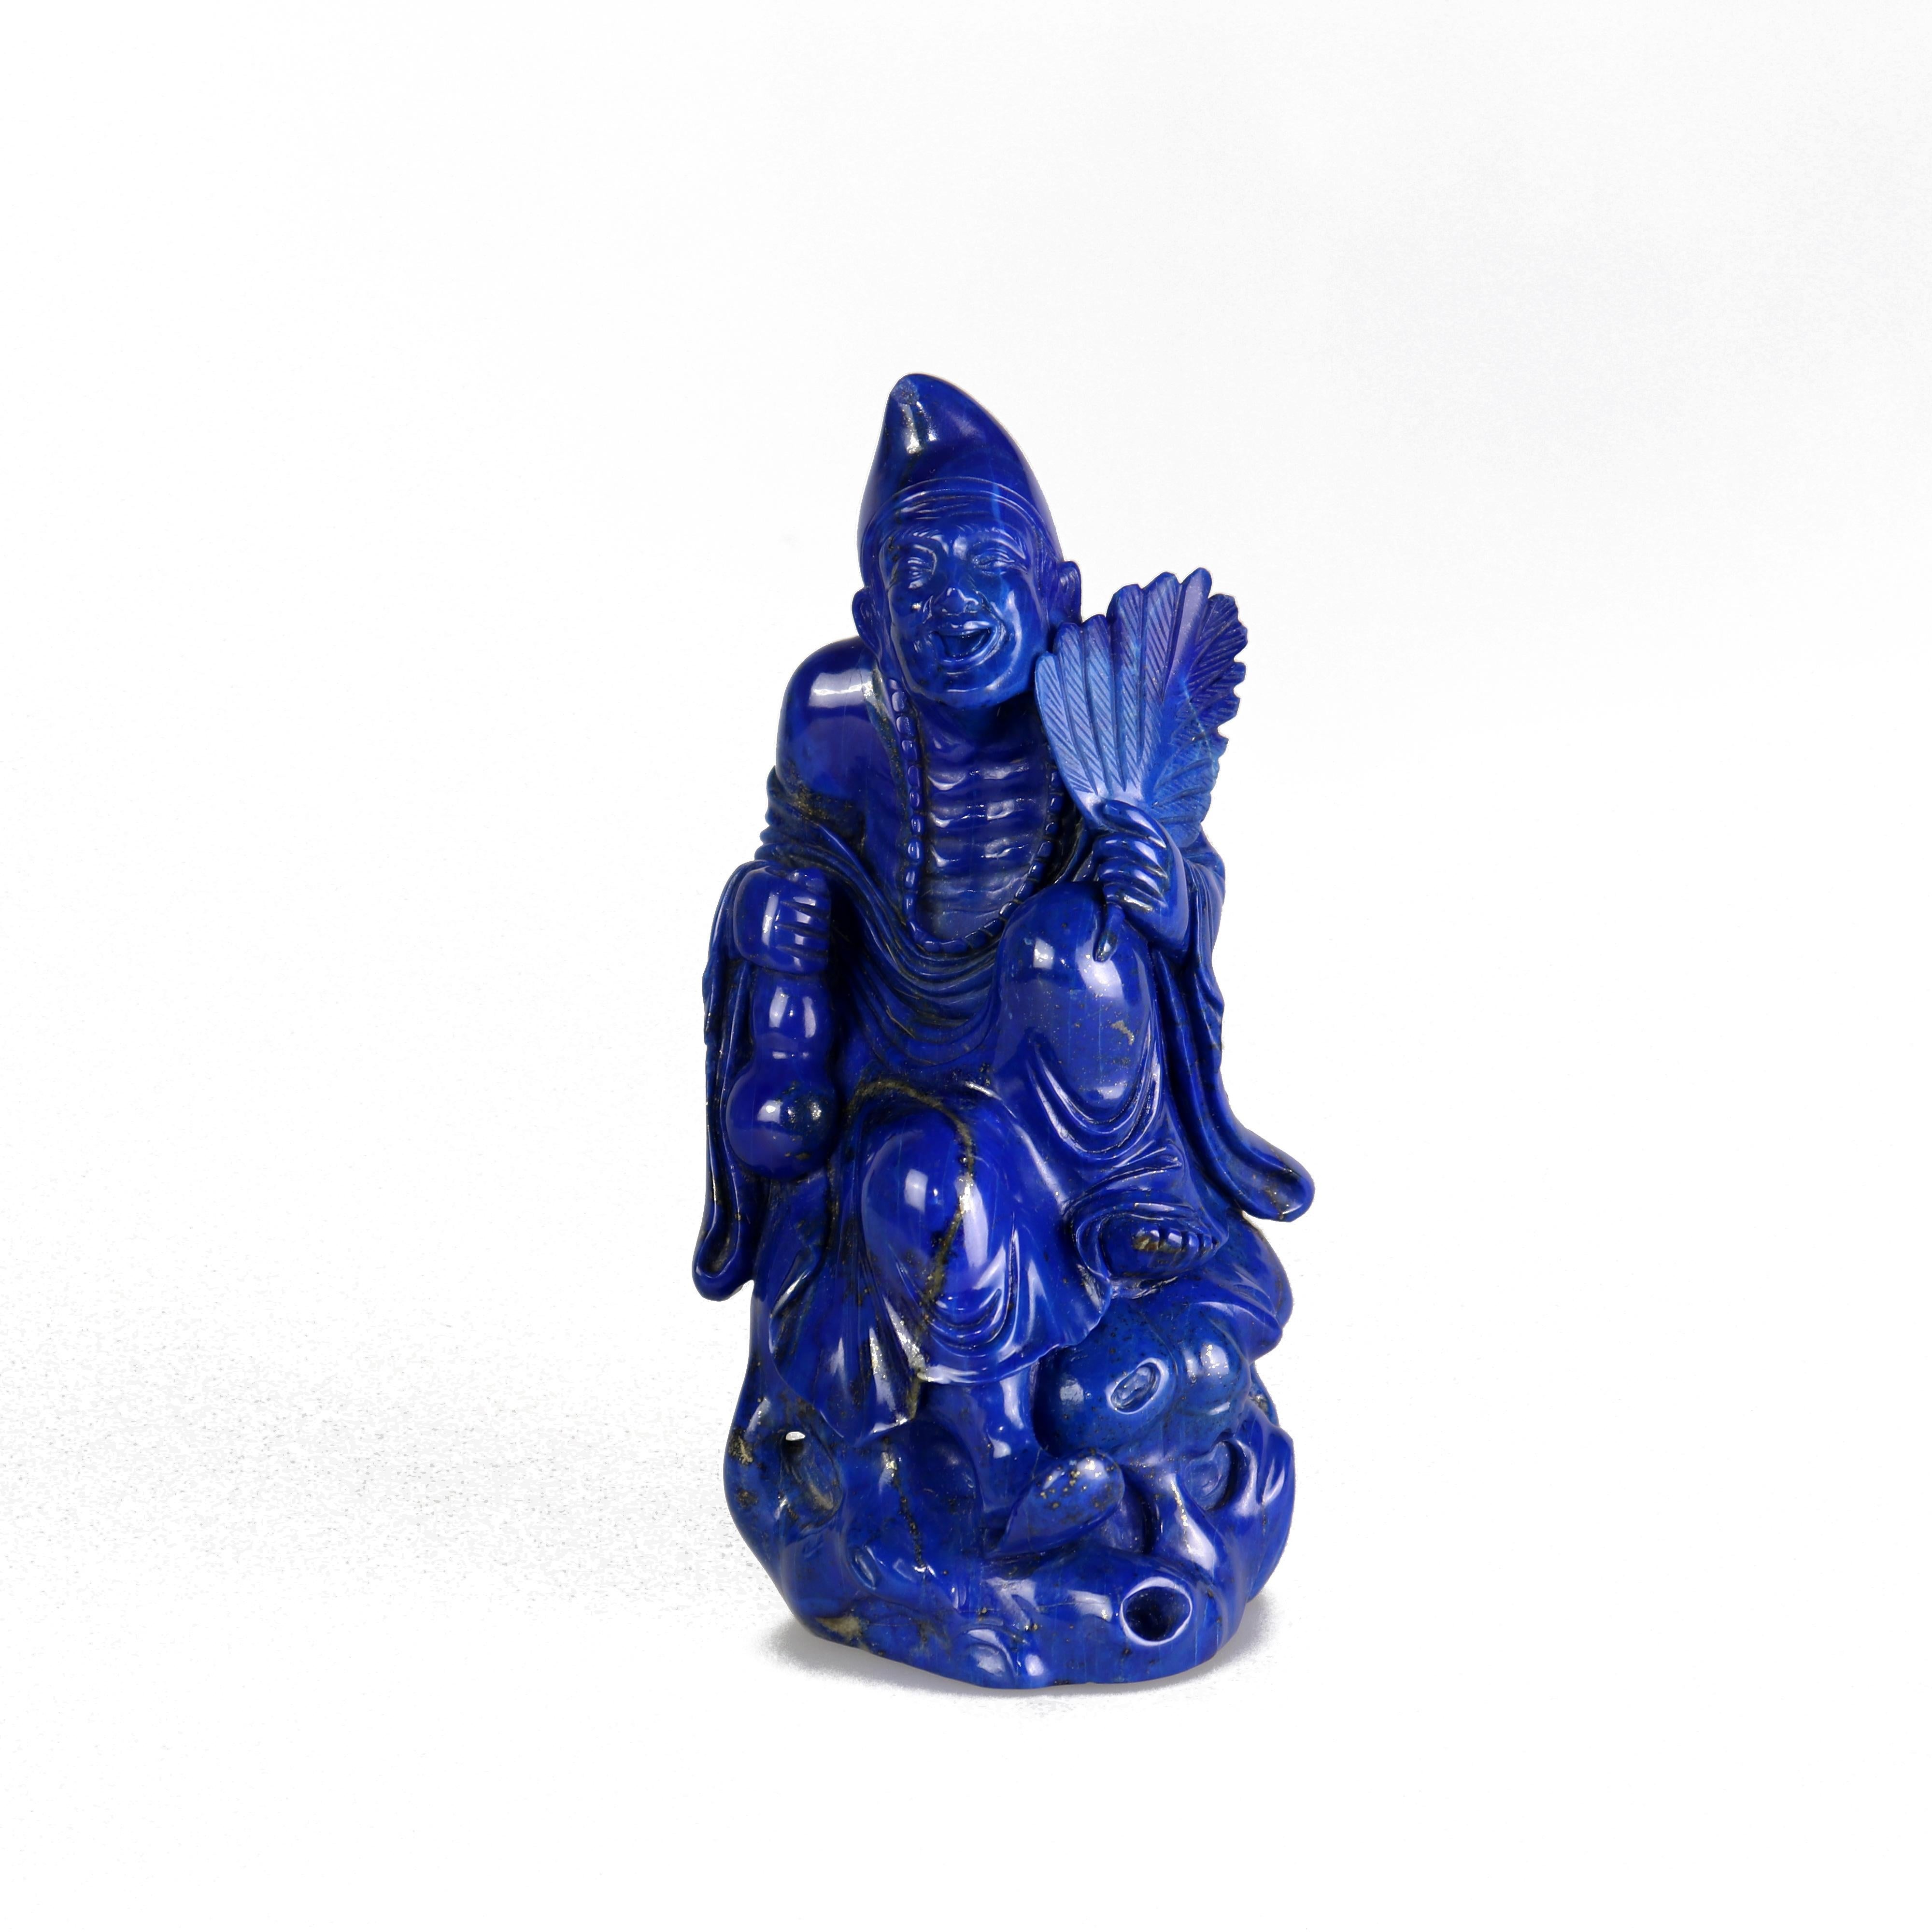 Chinese Export Lapis Lazuli Laughing Man Carved Figure Spiritual Artisanal Statue Sculpture For Sale